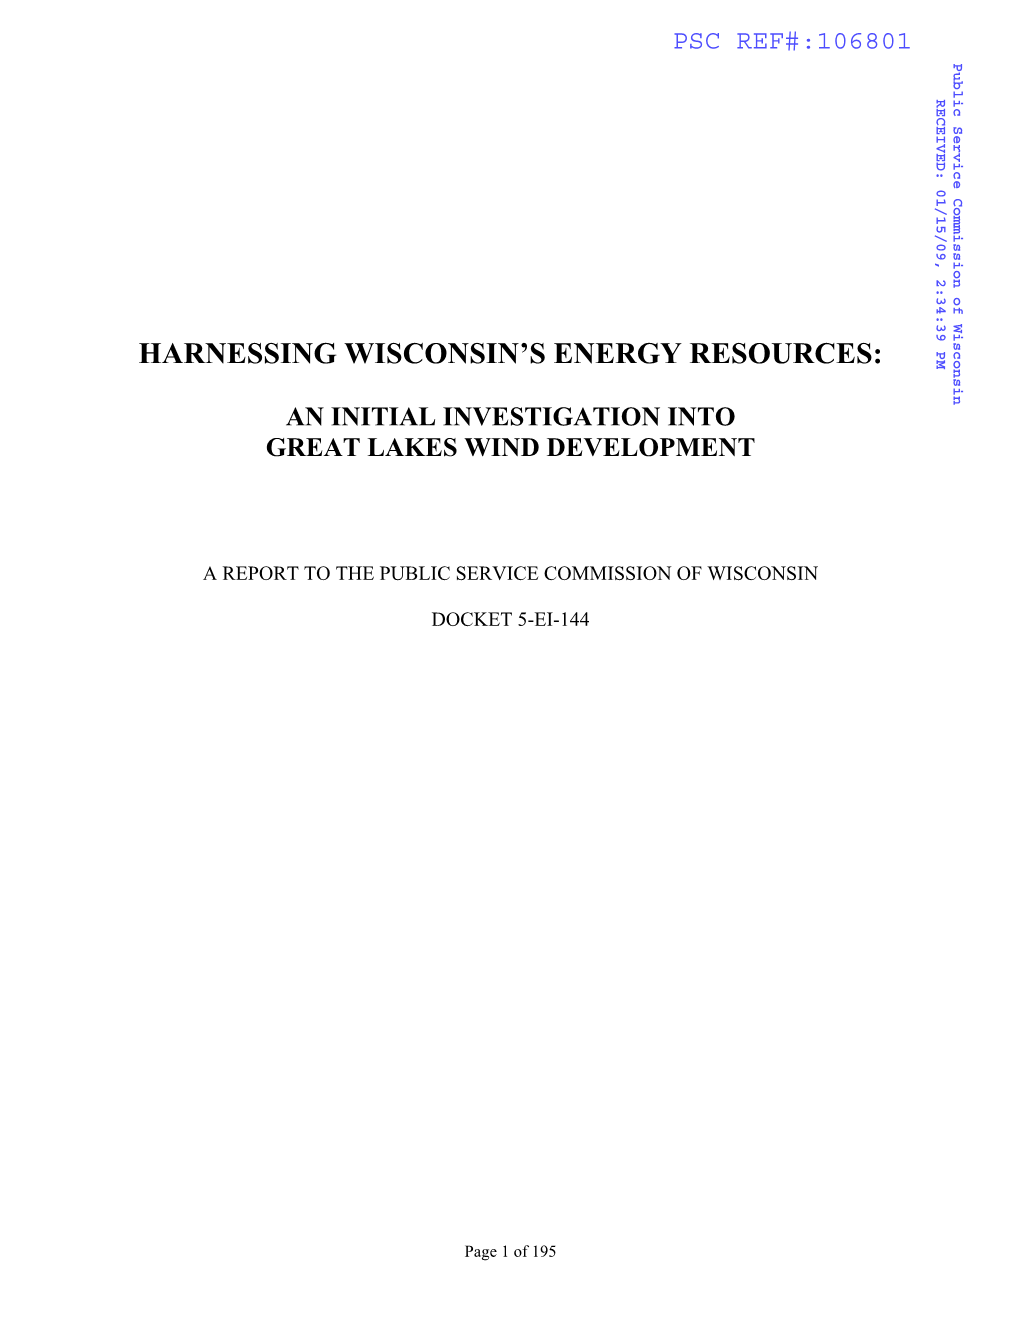 Harnessing Wisconsin's Energy Resources